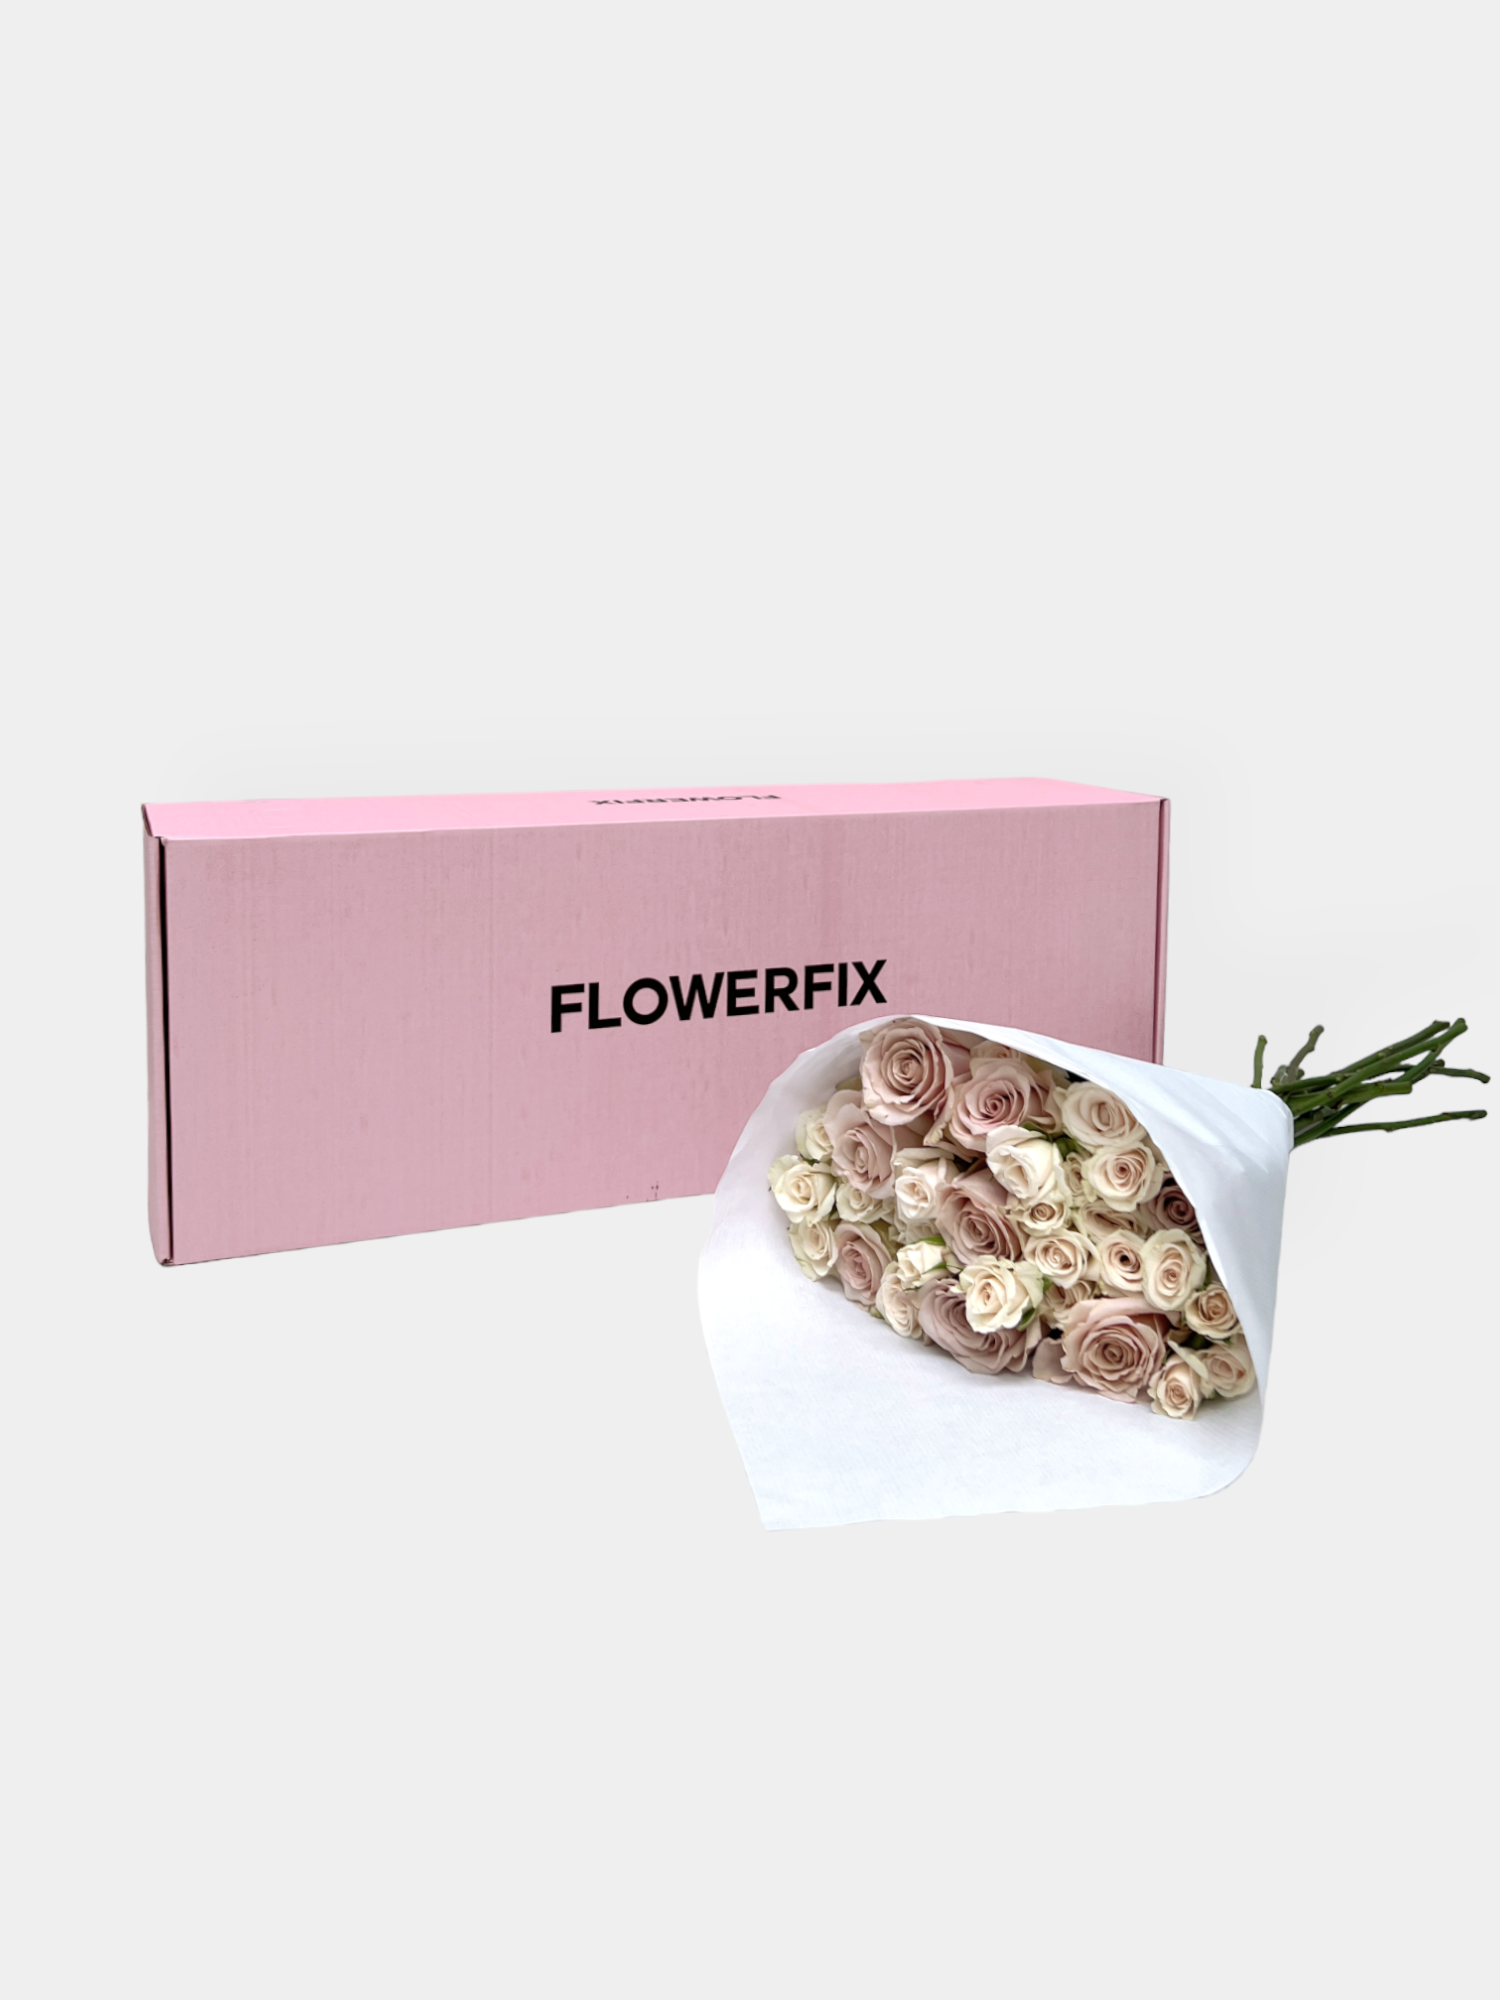 Quicksand Roses and Porcelina Spray Roses - FLOWERFIX